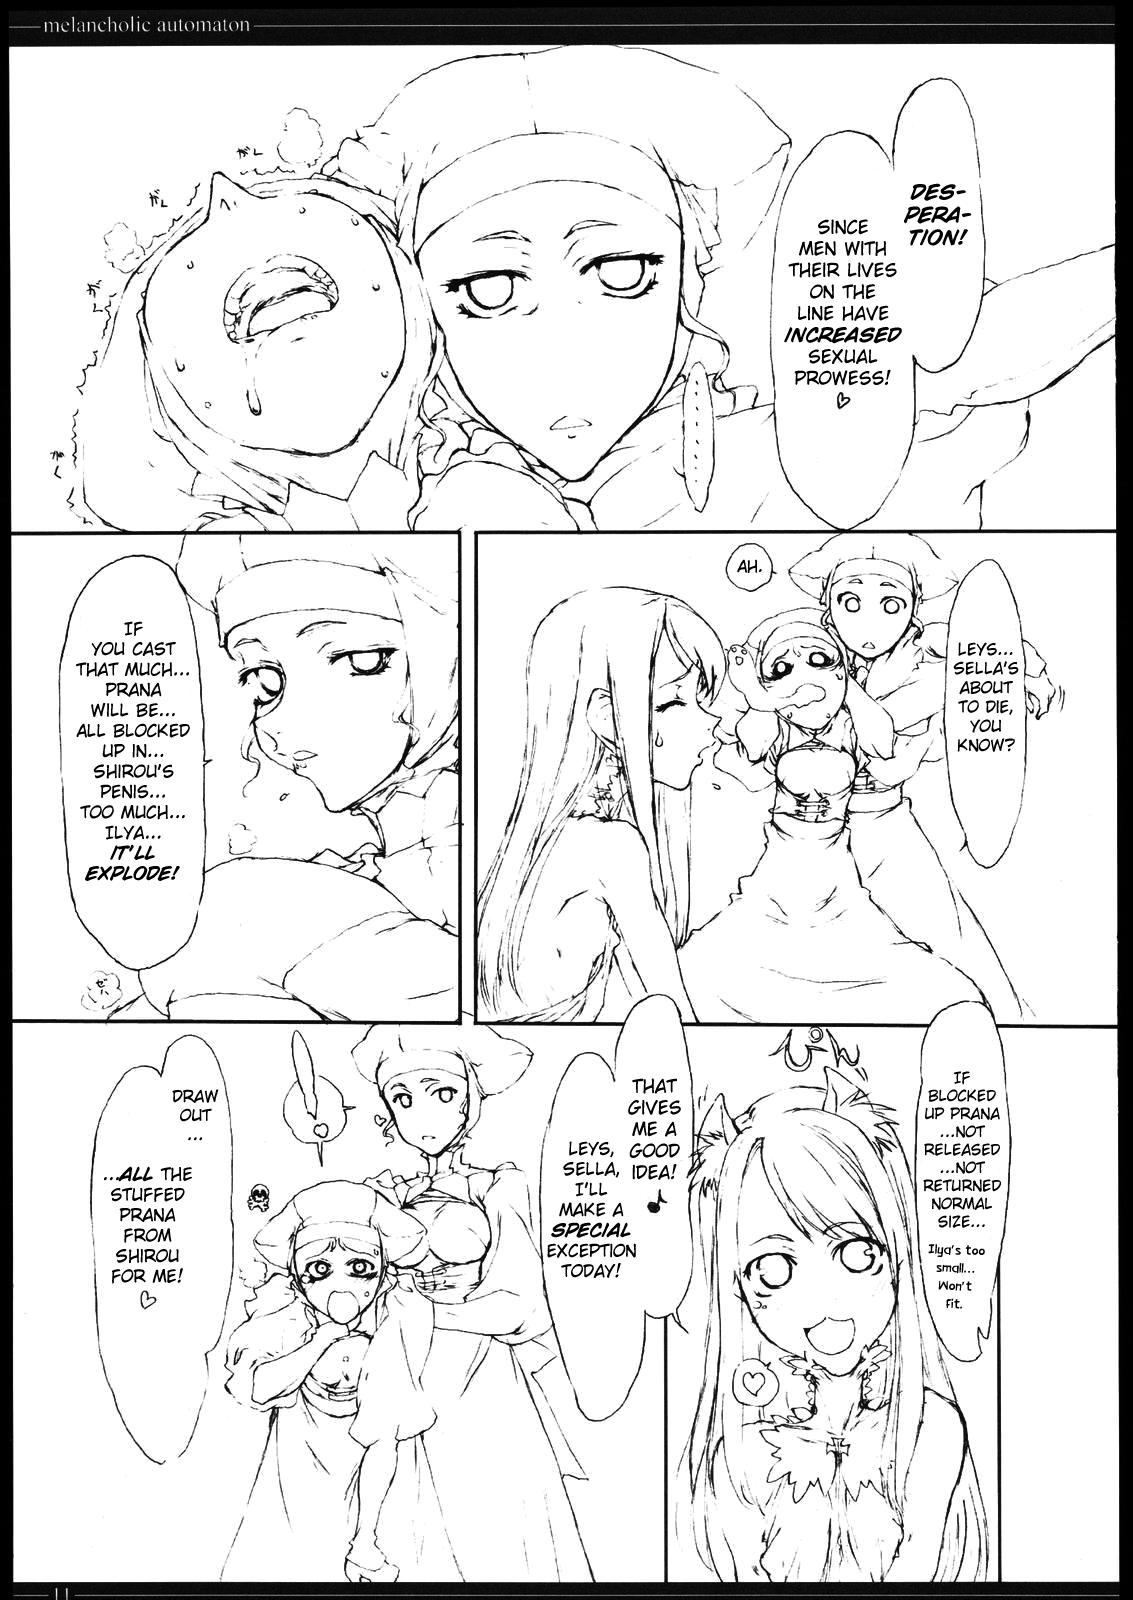 Self Melancholic Automaton - One day at the castle of Einzbern - Fate stay night Bubble Butt - Page 10